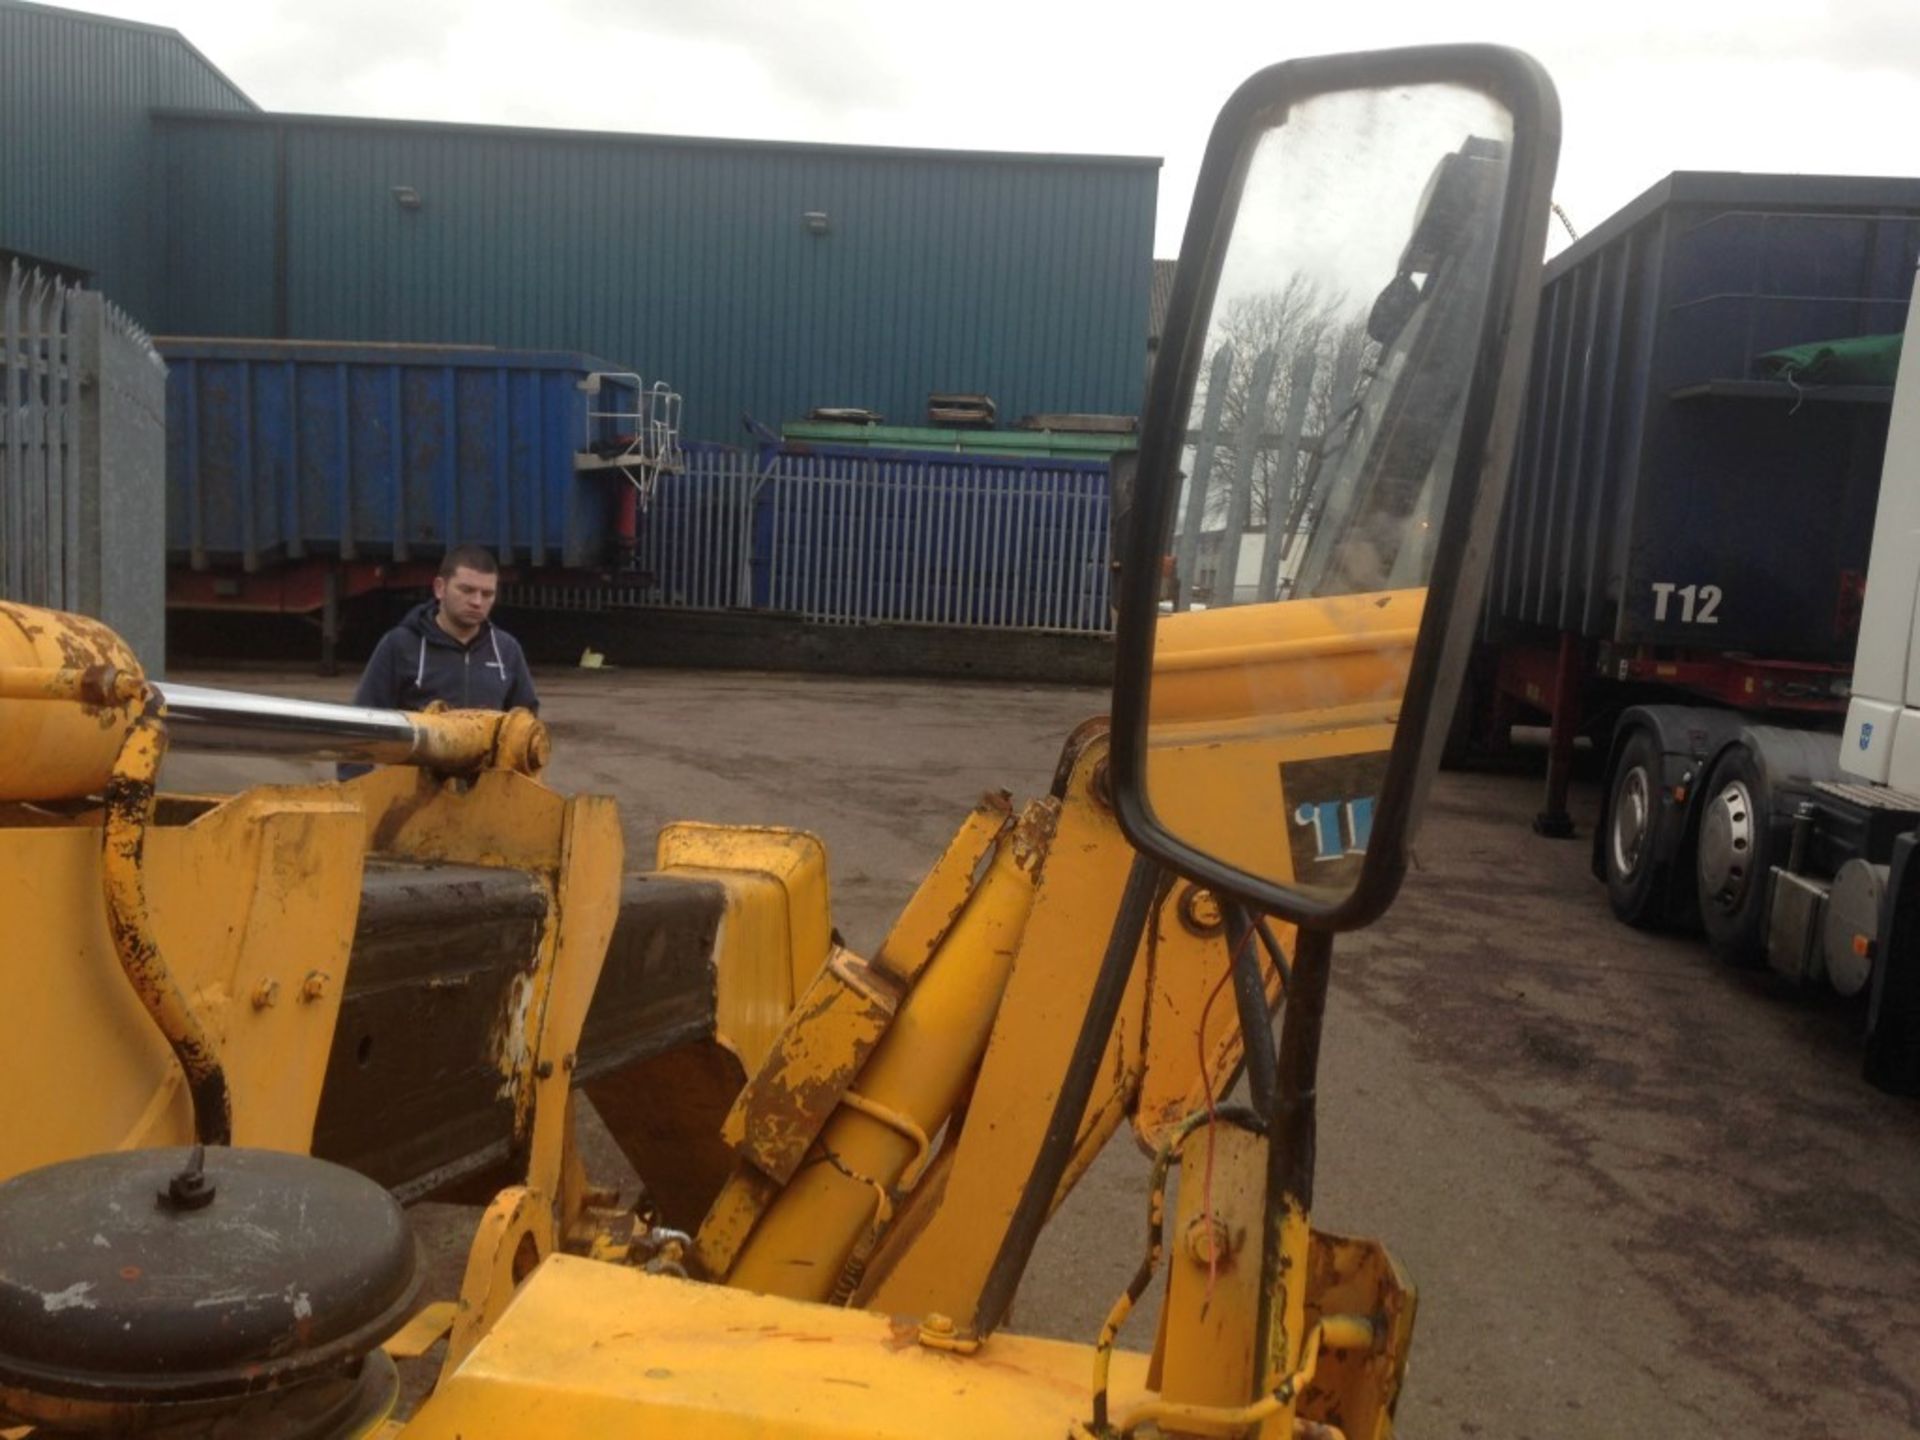 1 x JCB 530-120 Telescopic Handler With Forks - 1407 Hours - CL057 - Location: Welwyn, - Image 25 of 26